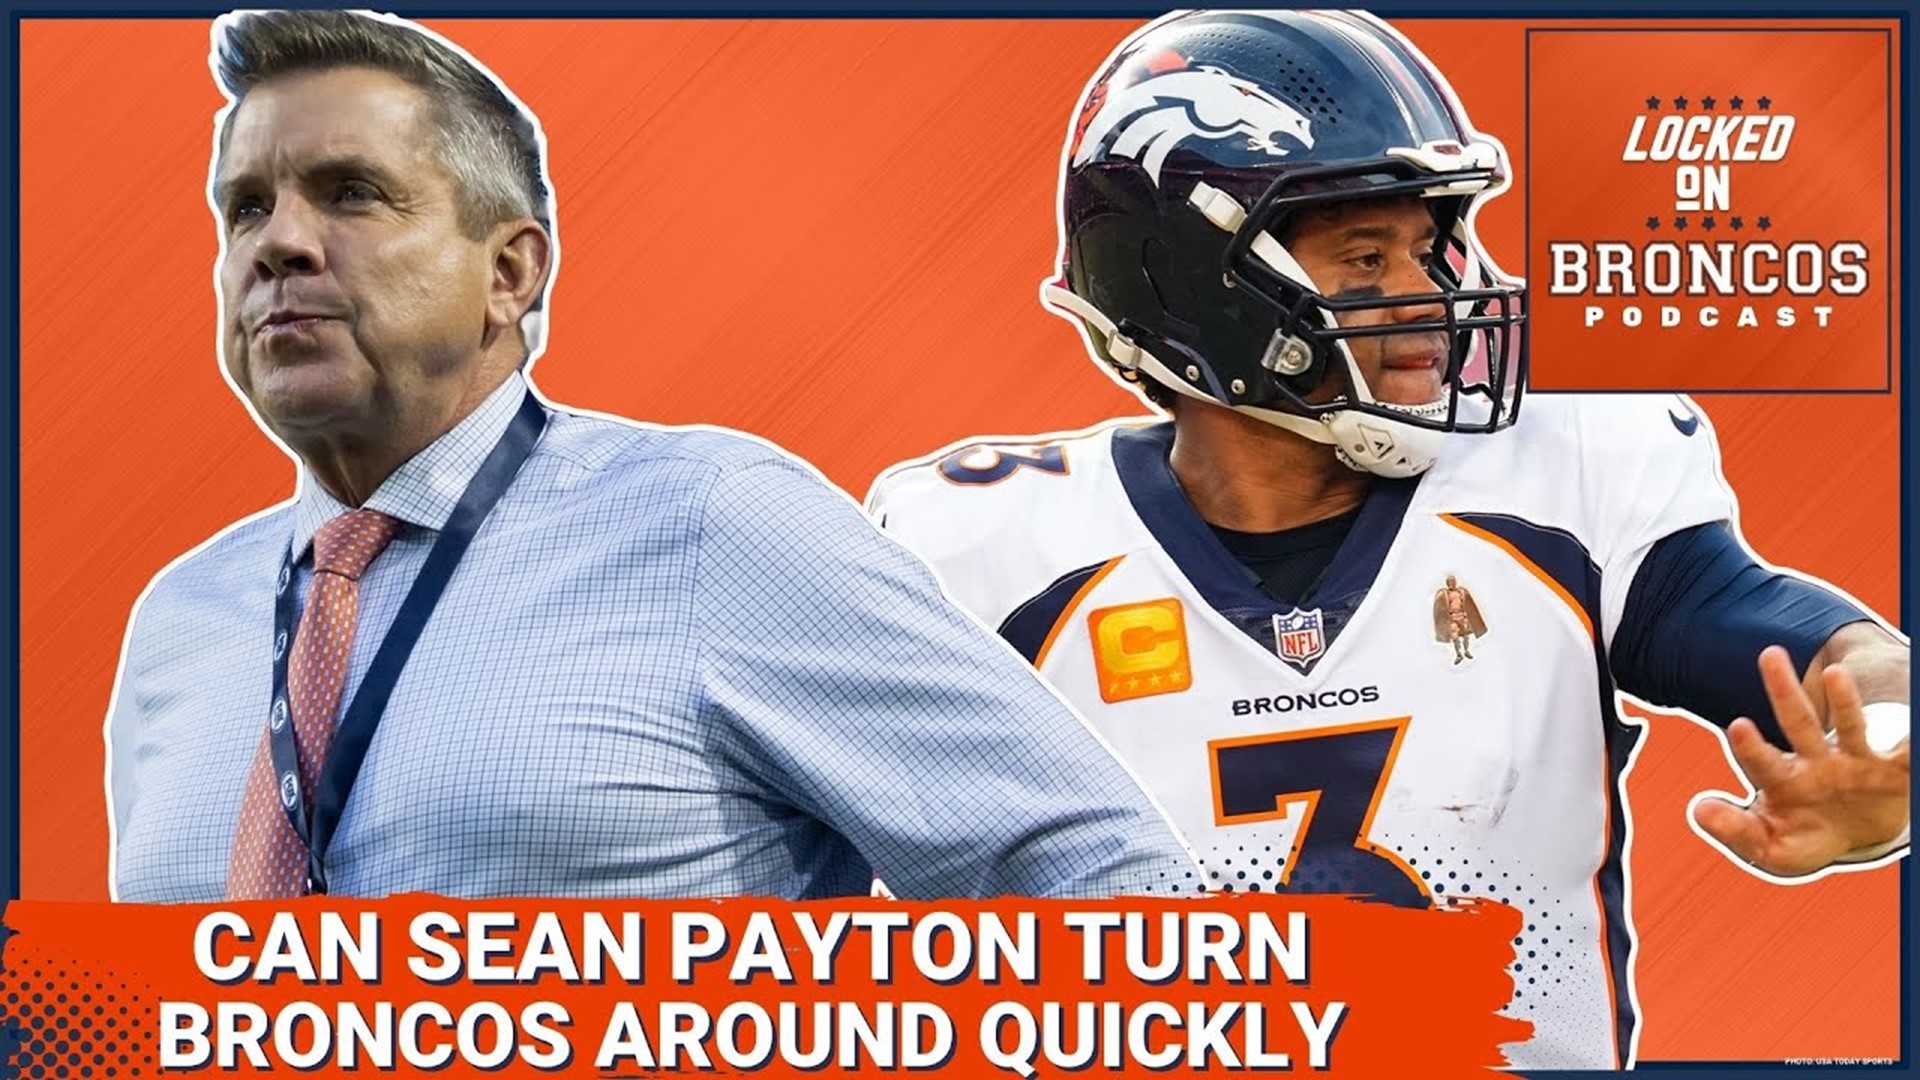 Denver Broncos can turn things around quickly with Sean Payton